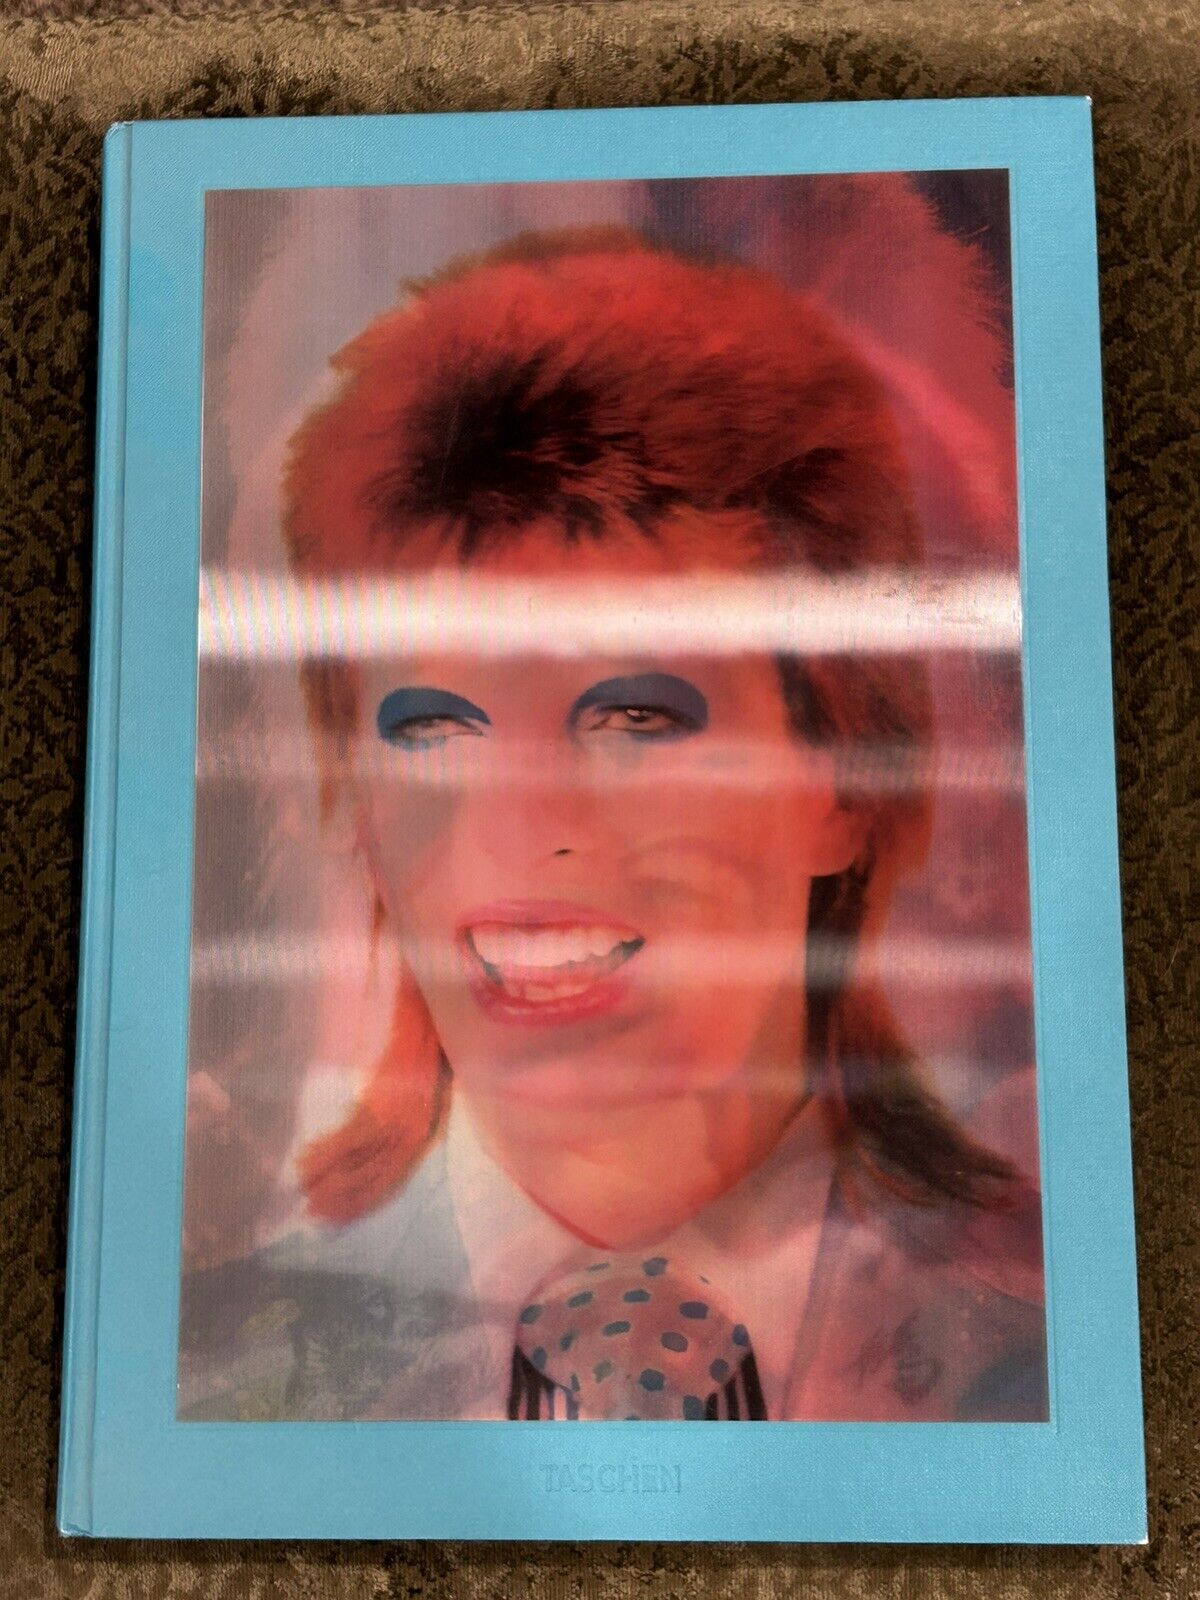 The Rise Of David Bowie Mick Rock Signed Taschen Trade Edition Rare 